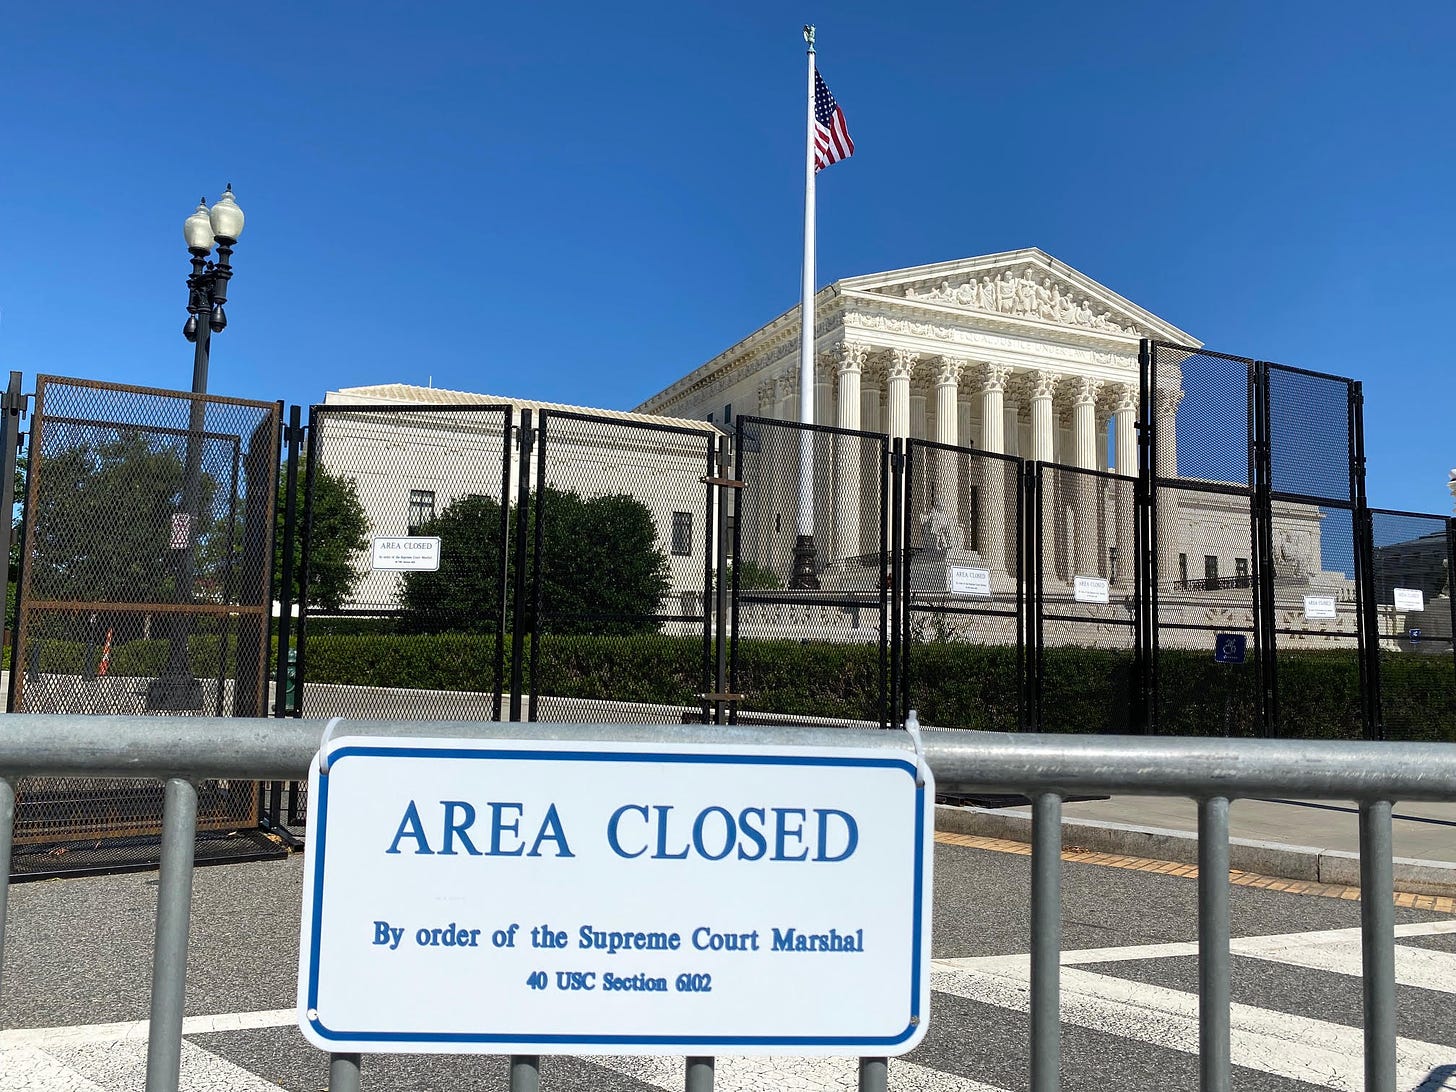 A photograph of the Supreme Court in the background. In the midground, a tall black fence that encircles the court grounds. In the foreground, another, lower, gray fence with a sign, "AREA CLOSED By order of the Supreme Court Marshal, 40 USC Section 6102.